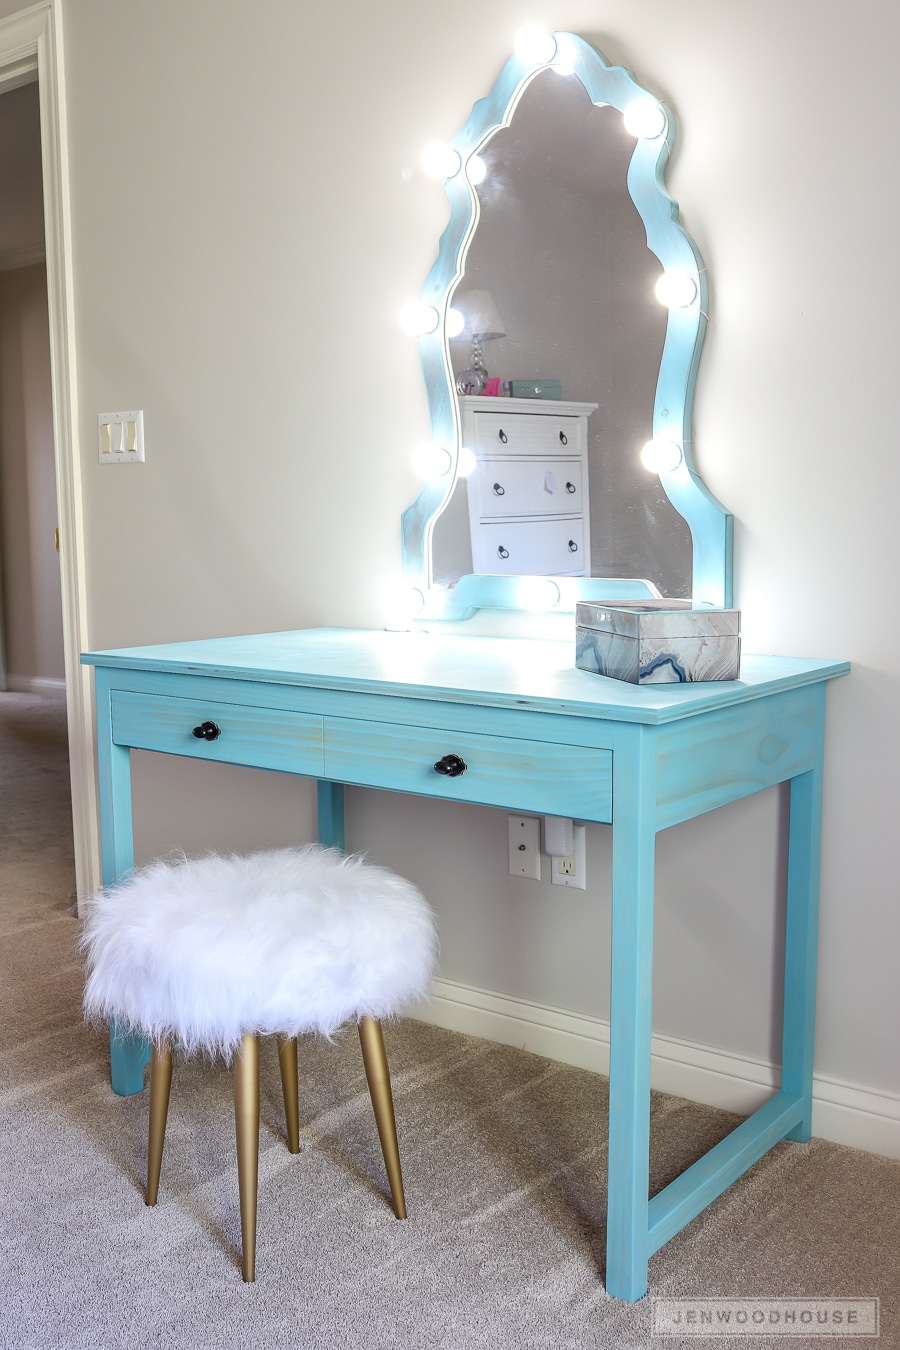 How to build a DIY makeup vanity with lighted mirror